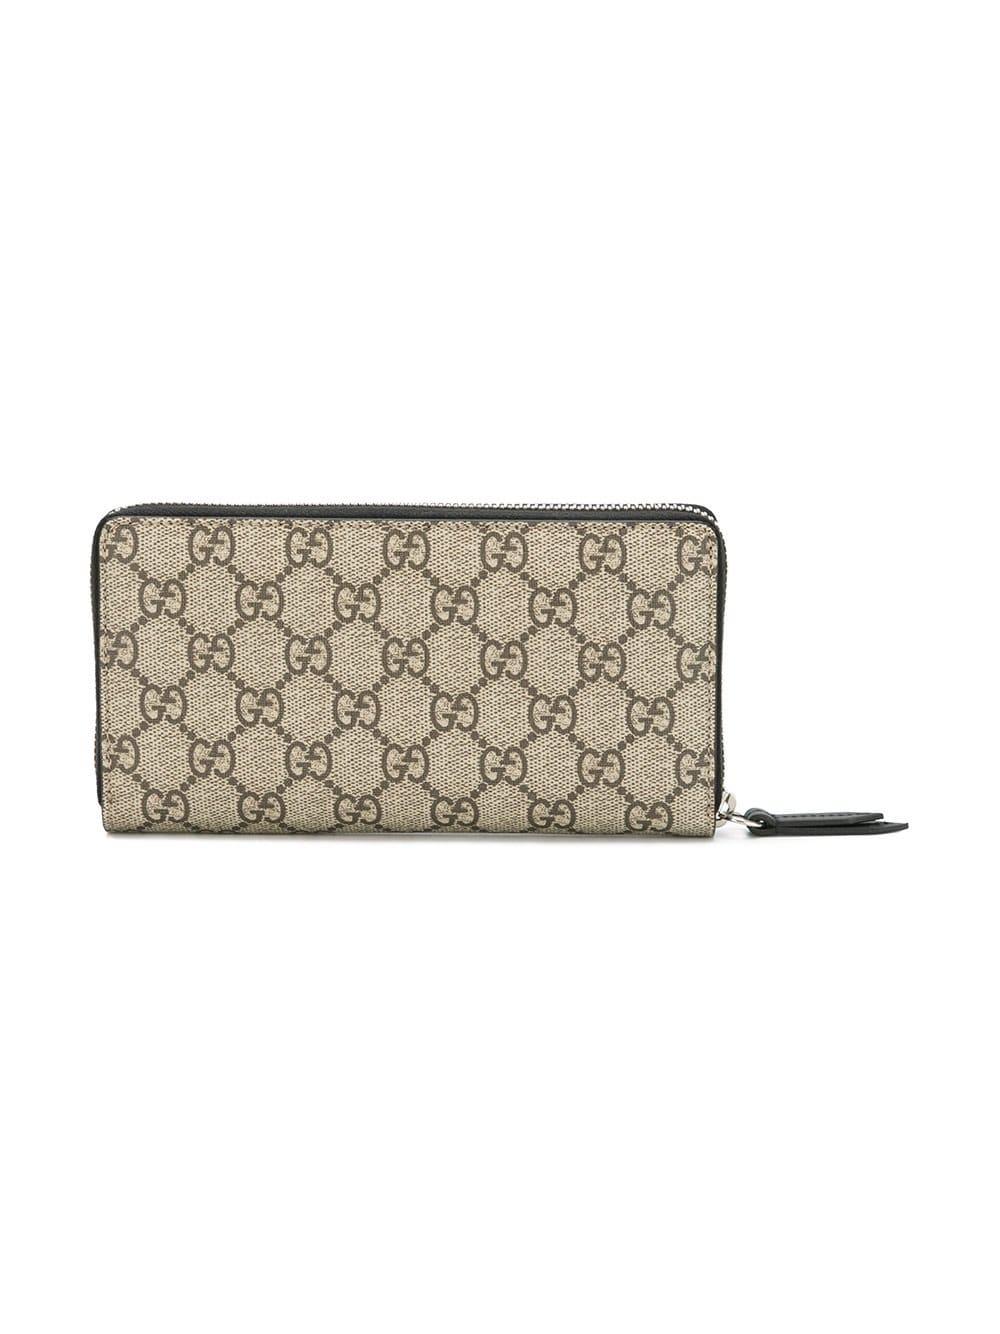 Gucci Gg Wallet With Tiger Printable | IUCN Water